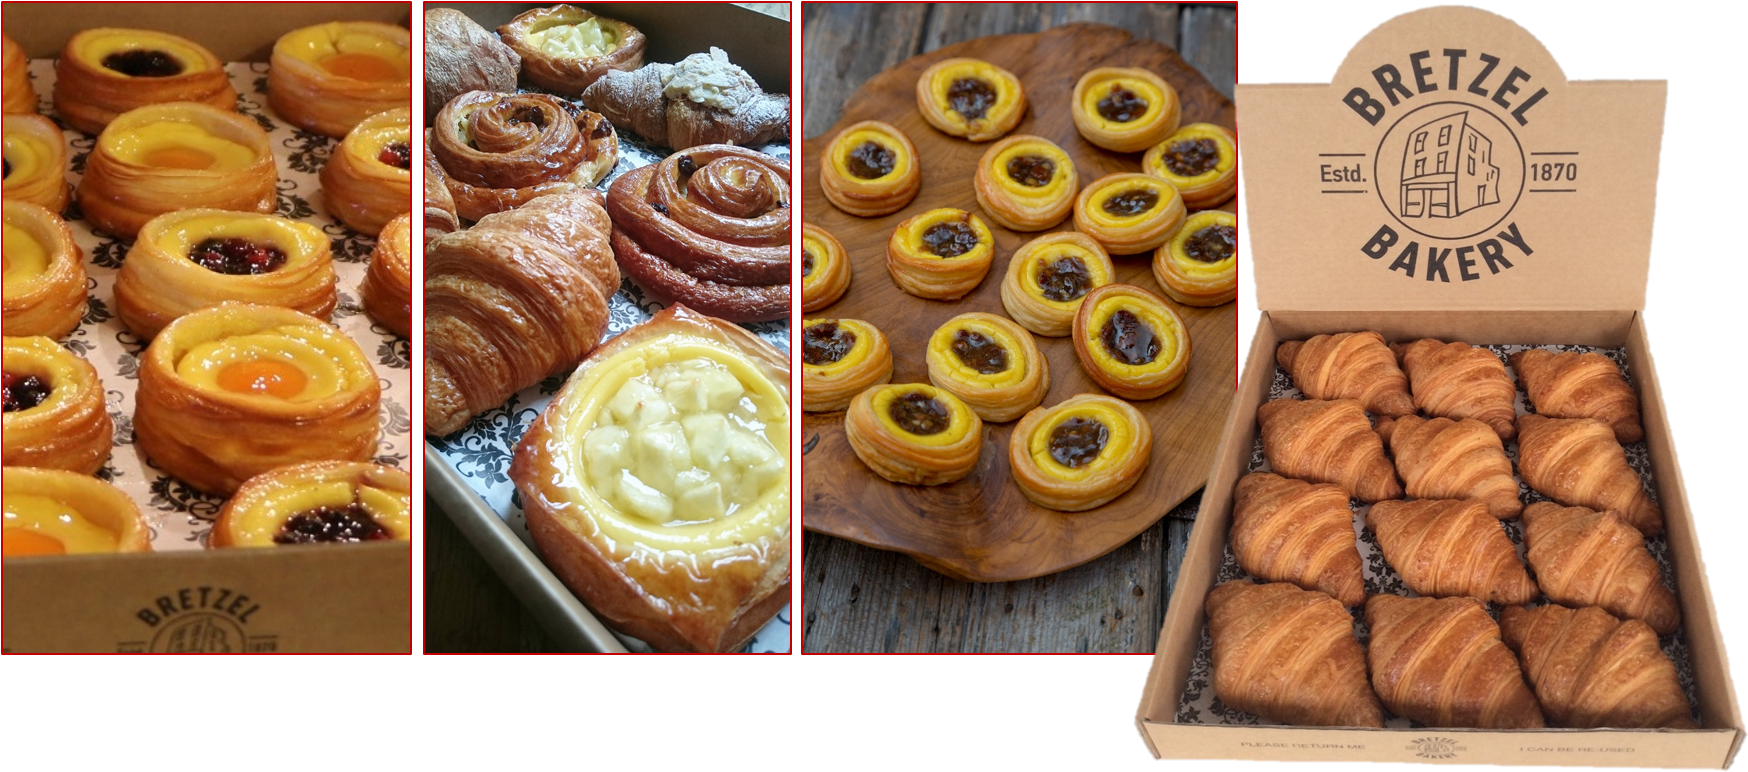 A Collage Of Pastries And Pastries